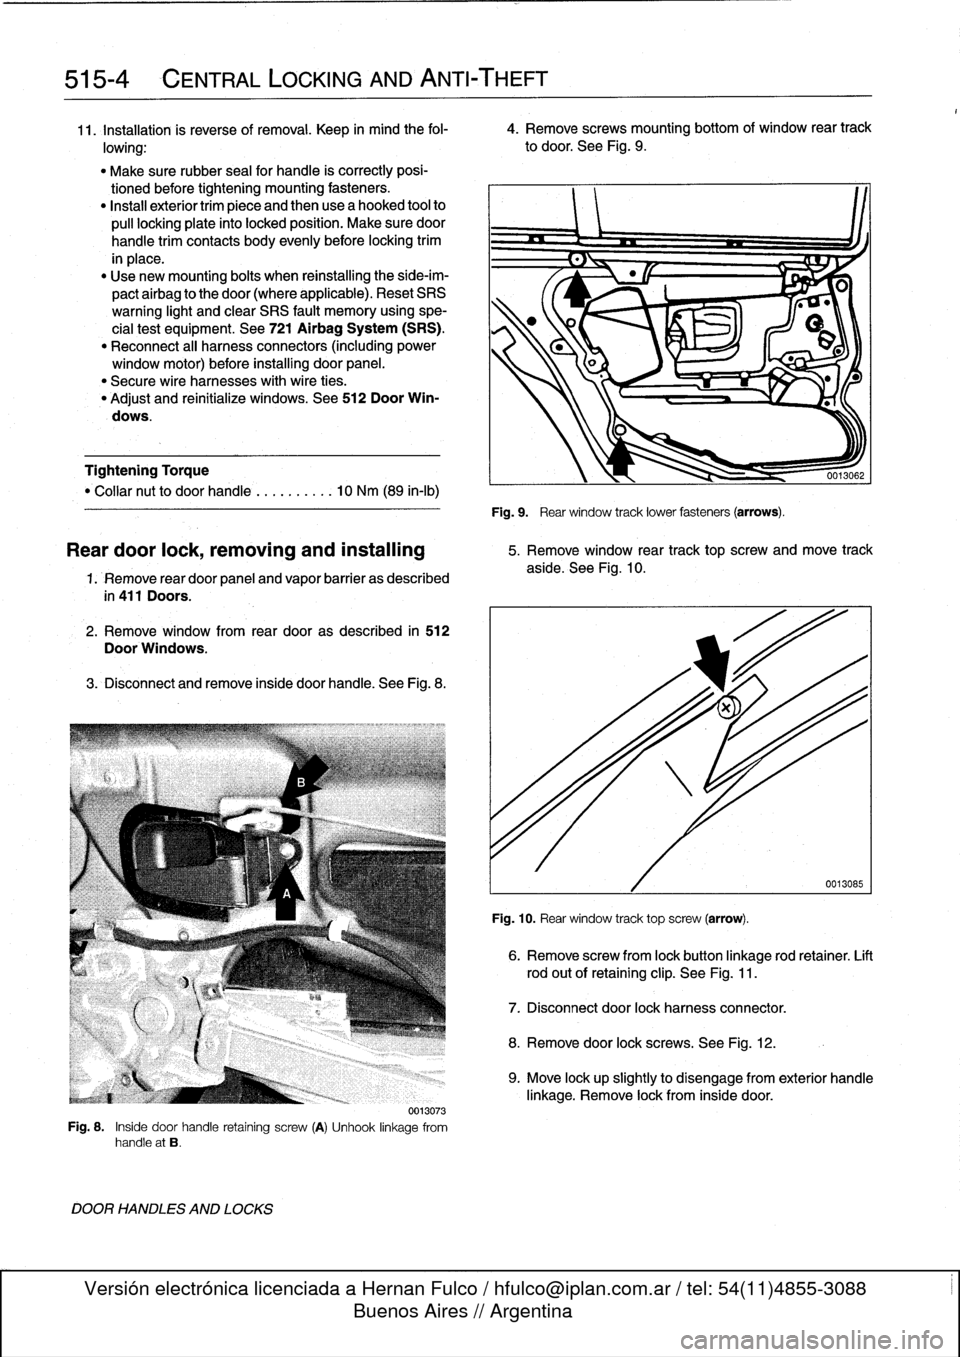 BMW M3 1993 E36 Workshop Manual 
515-4

	

CENTRAL
LOCKING
AND
ANTI-THEFT

11
.
Installation
is
reverse
of
removal
.
Keep
in
mind
the
fol-

	

4
.
Remove
screws
mounting
bottom
of
window
rear
track

lowing
:

	

to
door
.
See
Fig
.
